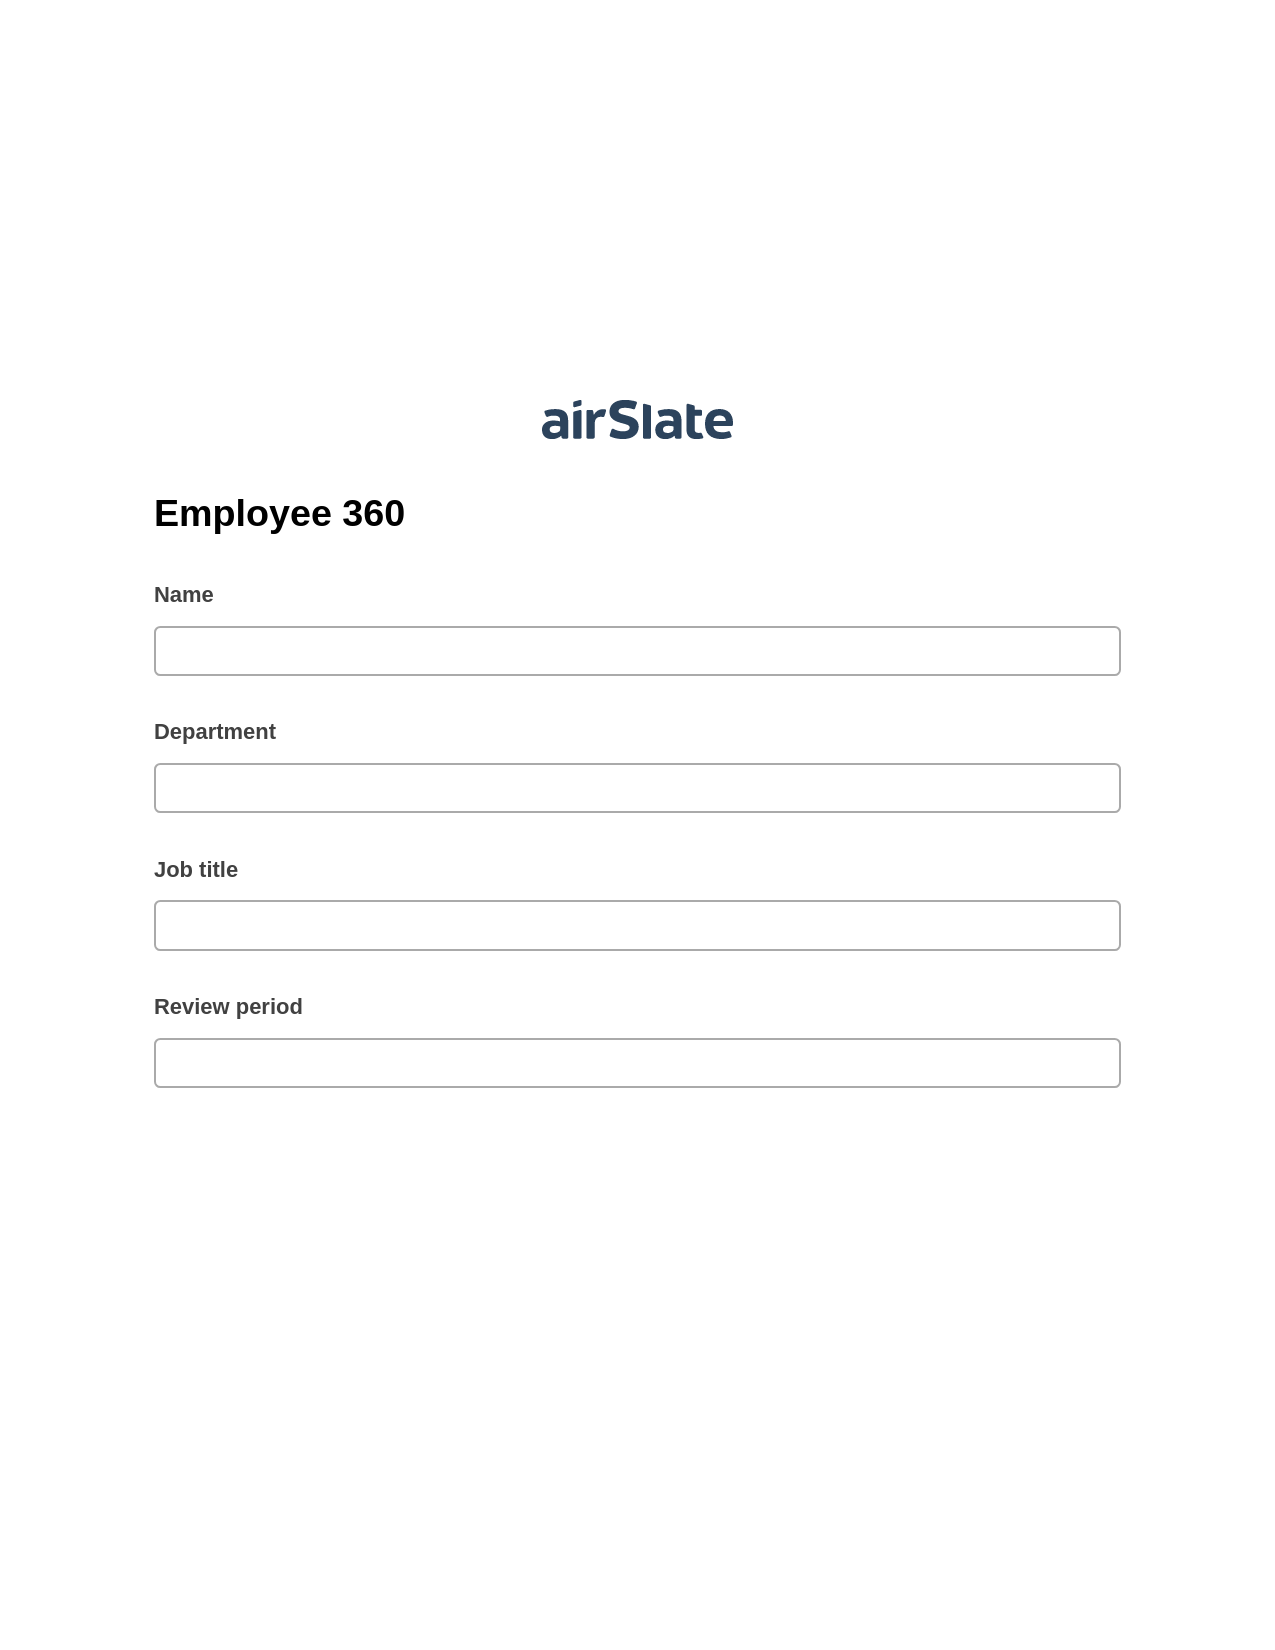 Multirole Employee 360 Pre-fill from another Slate Bot, Export to MS Dynamics 365 Bot, Archive to Google Drive Bot